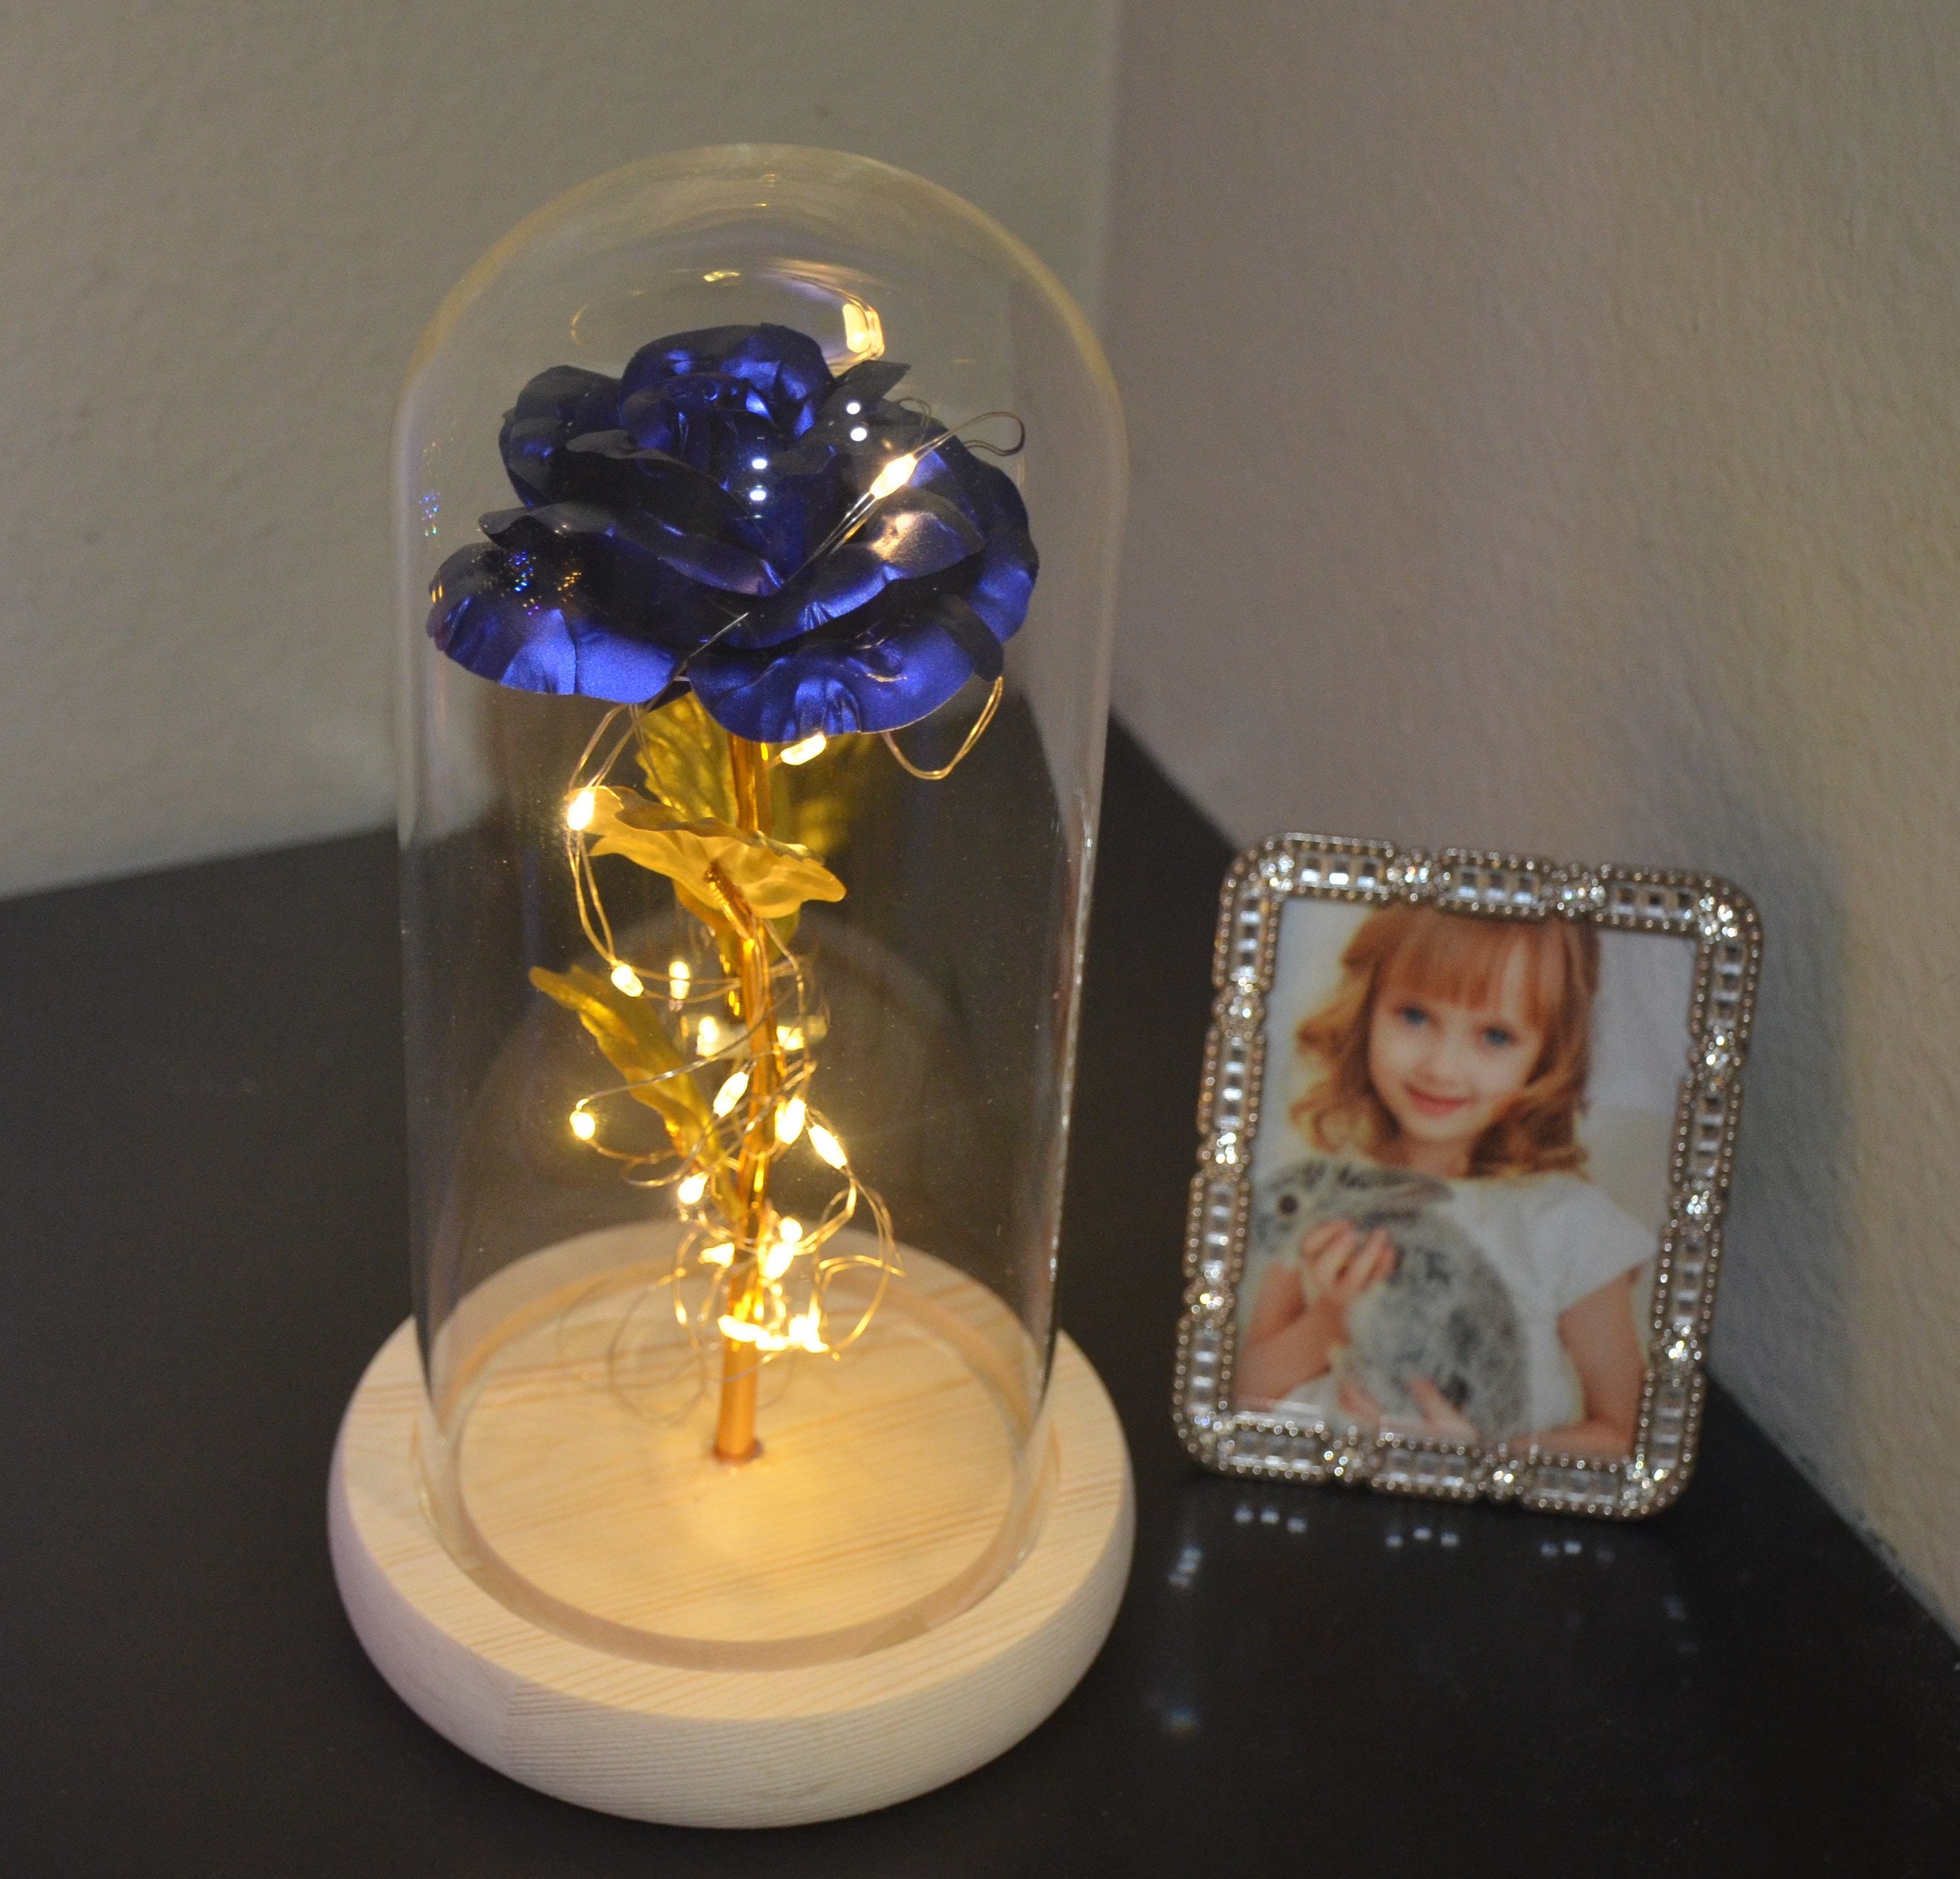 Unique Gift for Her Galaxy Rose Flower in Glass Dome with Led Light String on The Rose Gift for Best Friend Wife Girlfriend Birthday Graduation Anniversary Thanksgiving Gifts Purple Enchantress